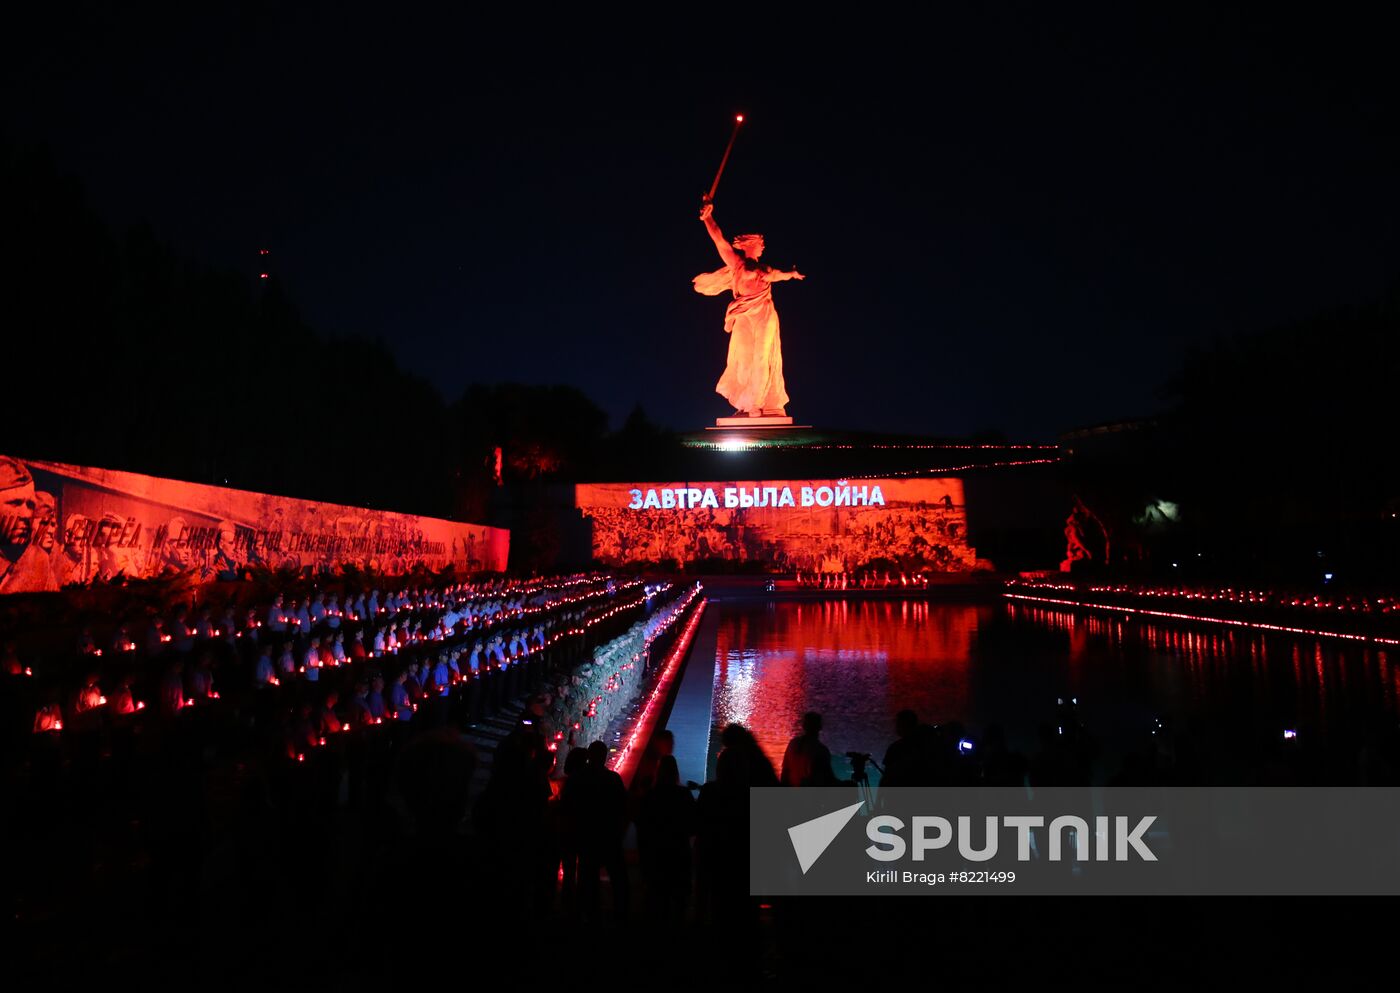 Russia WWII Remembrance and Sorrow Day